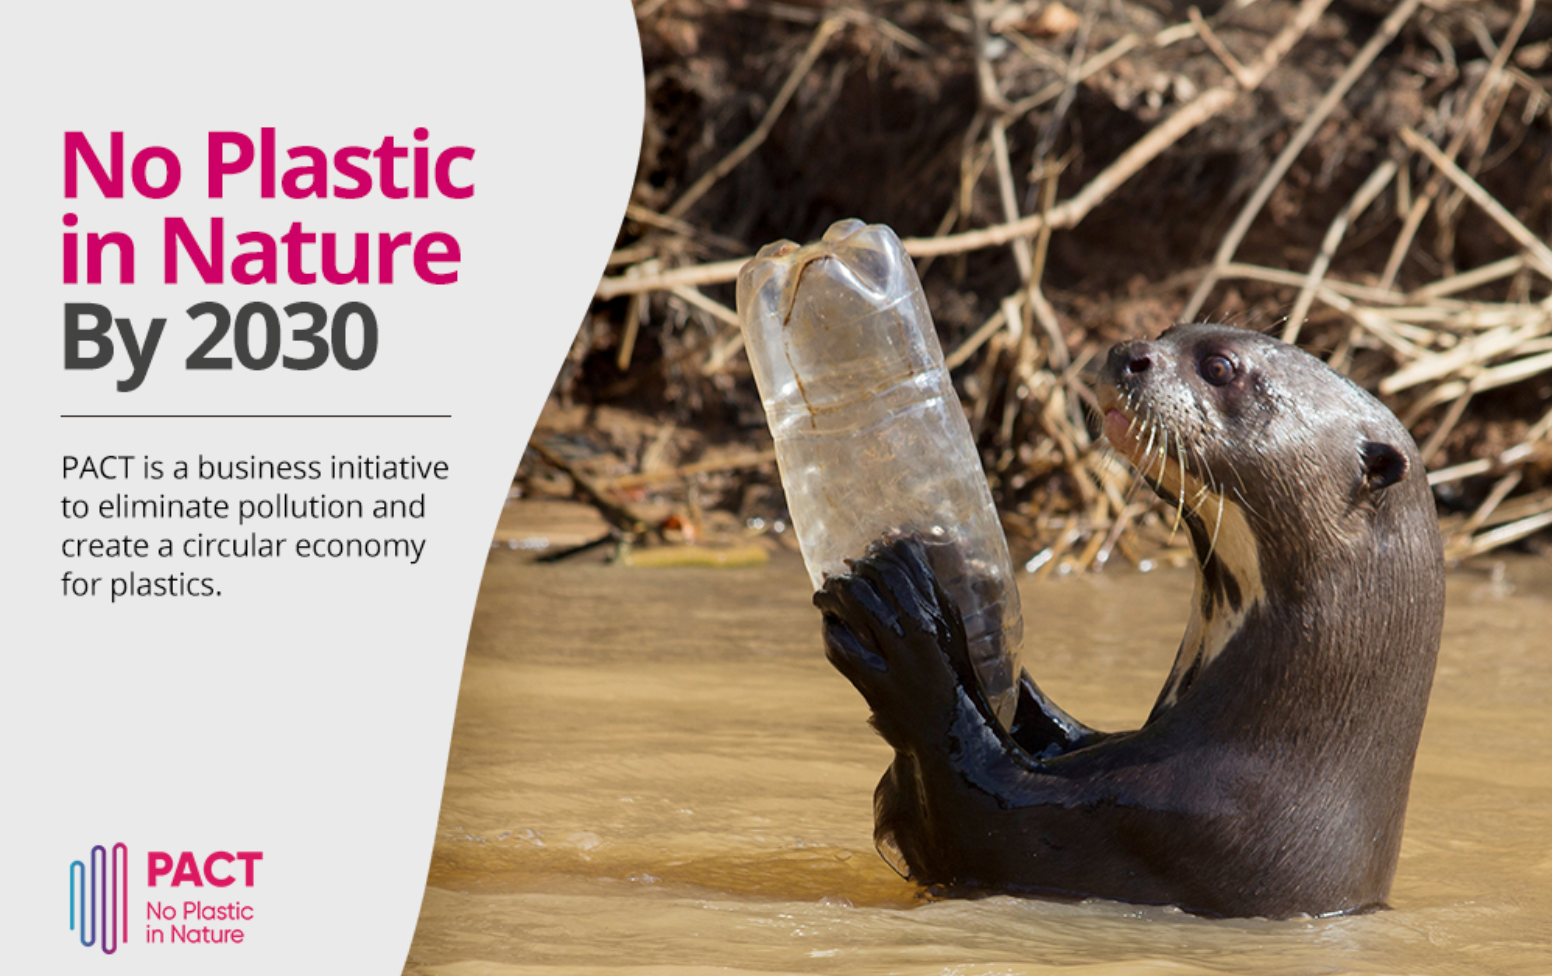 No Plastic in Nature by 2030